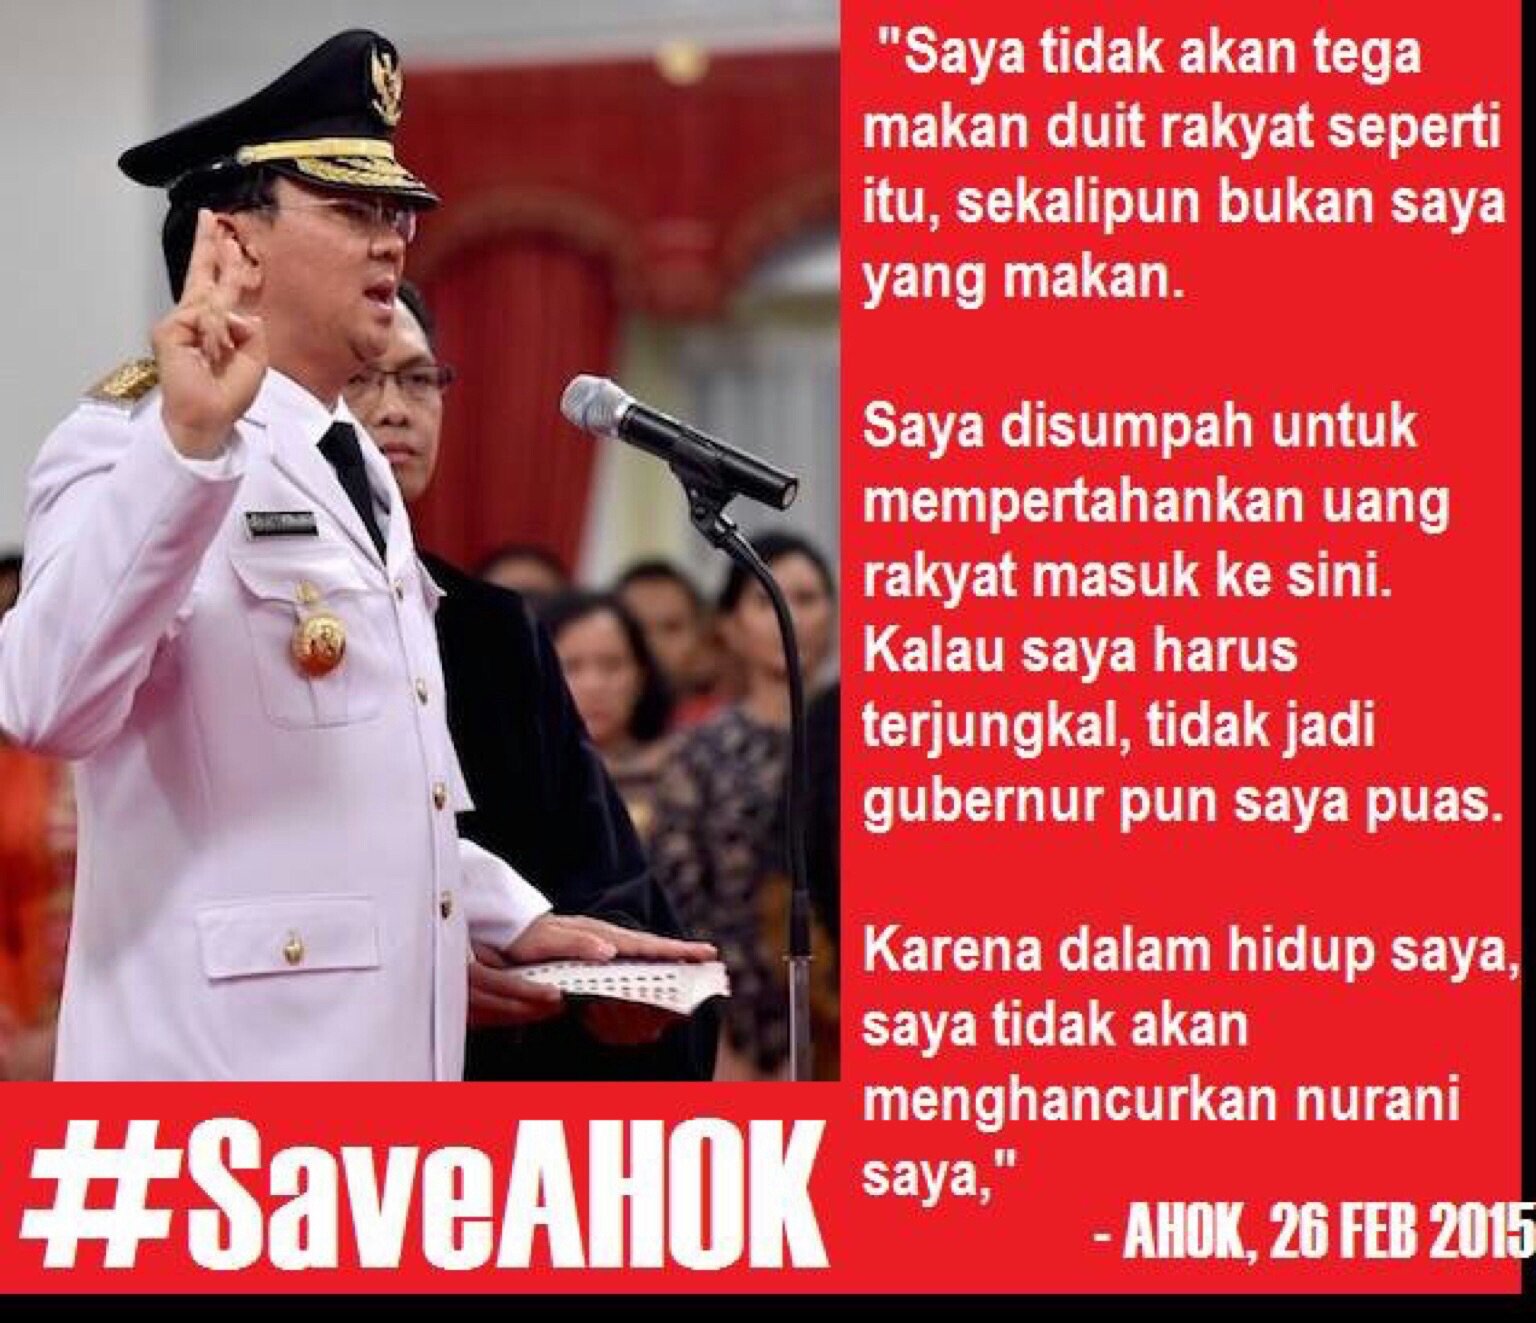 Ahok is the best